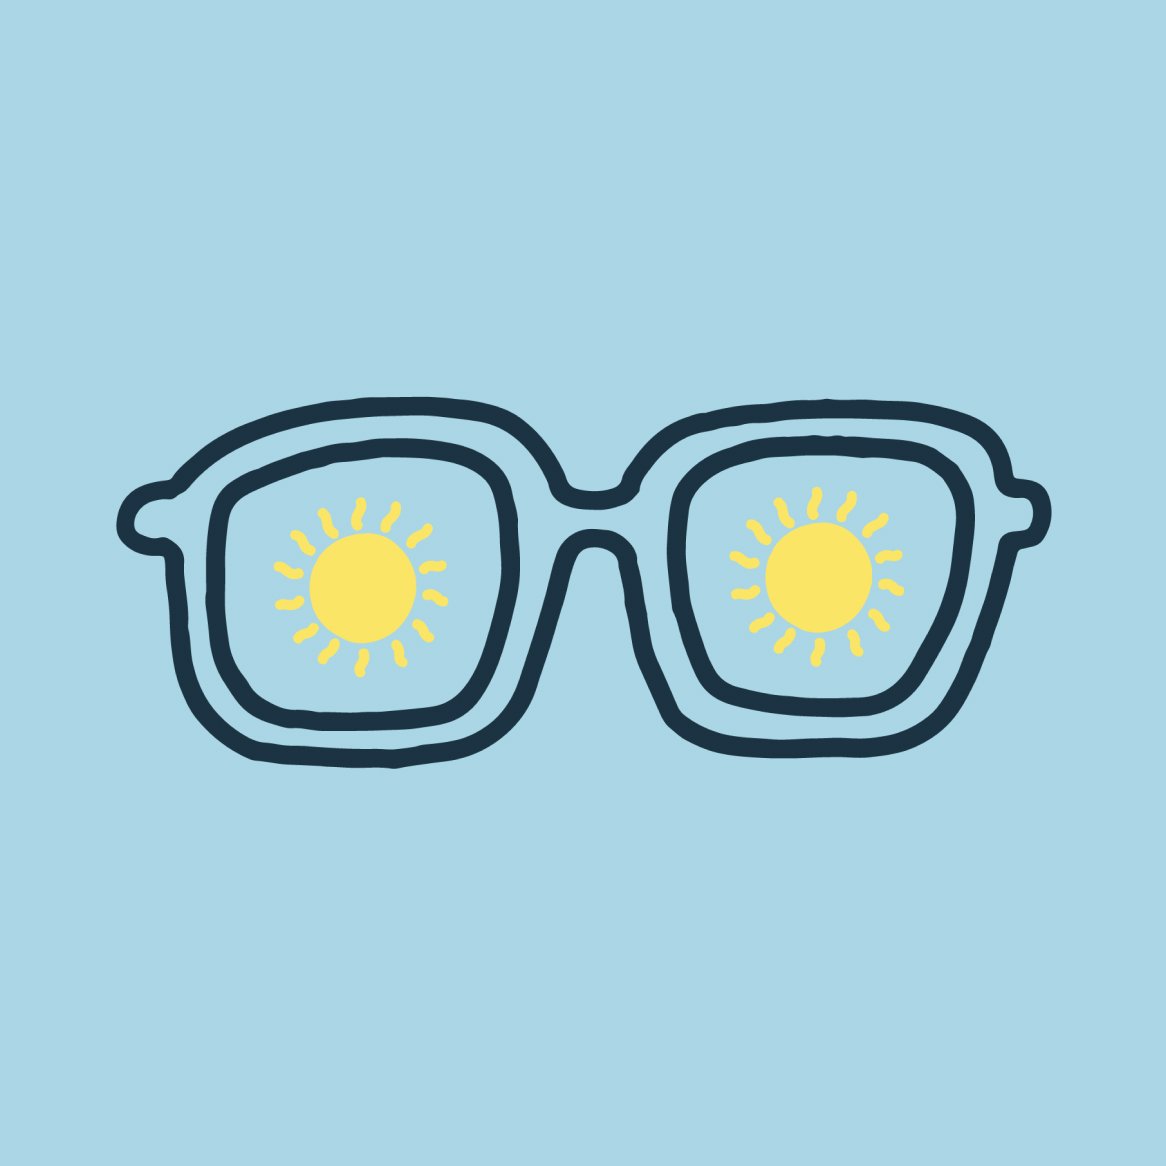 Illustration of a pair of glasses looking at the sun